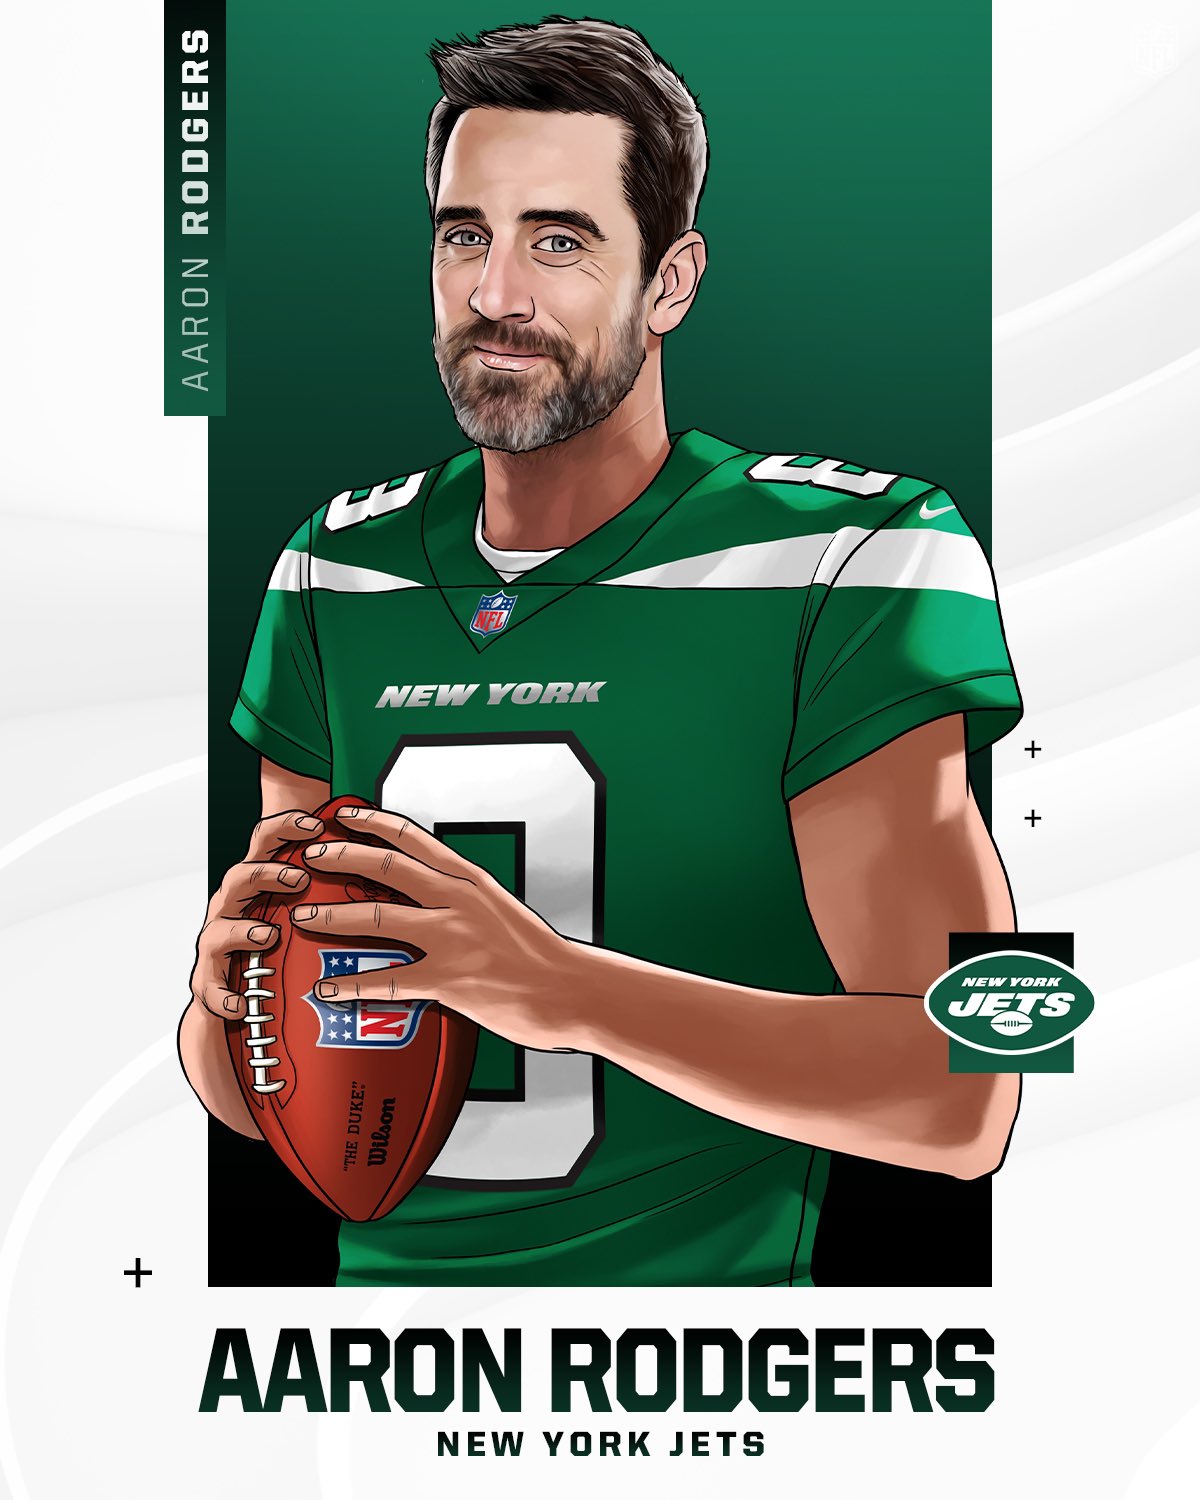 The arrival of Aaron Rodgers to the Jets